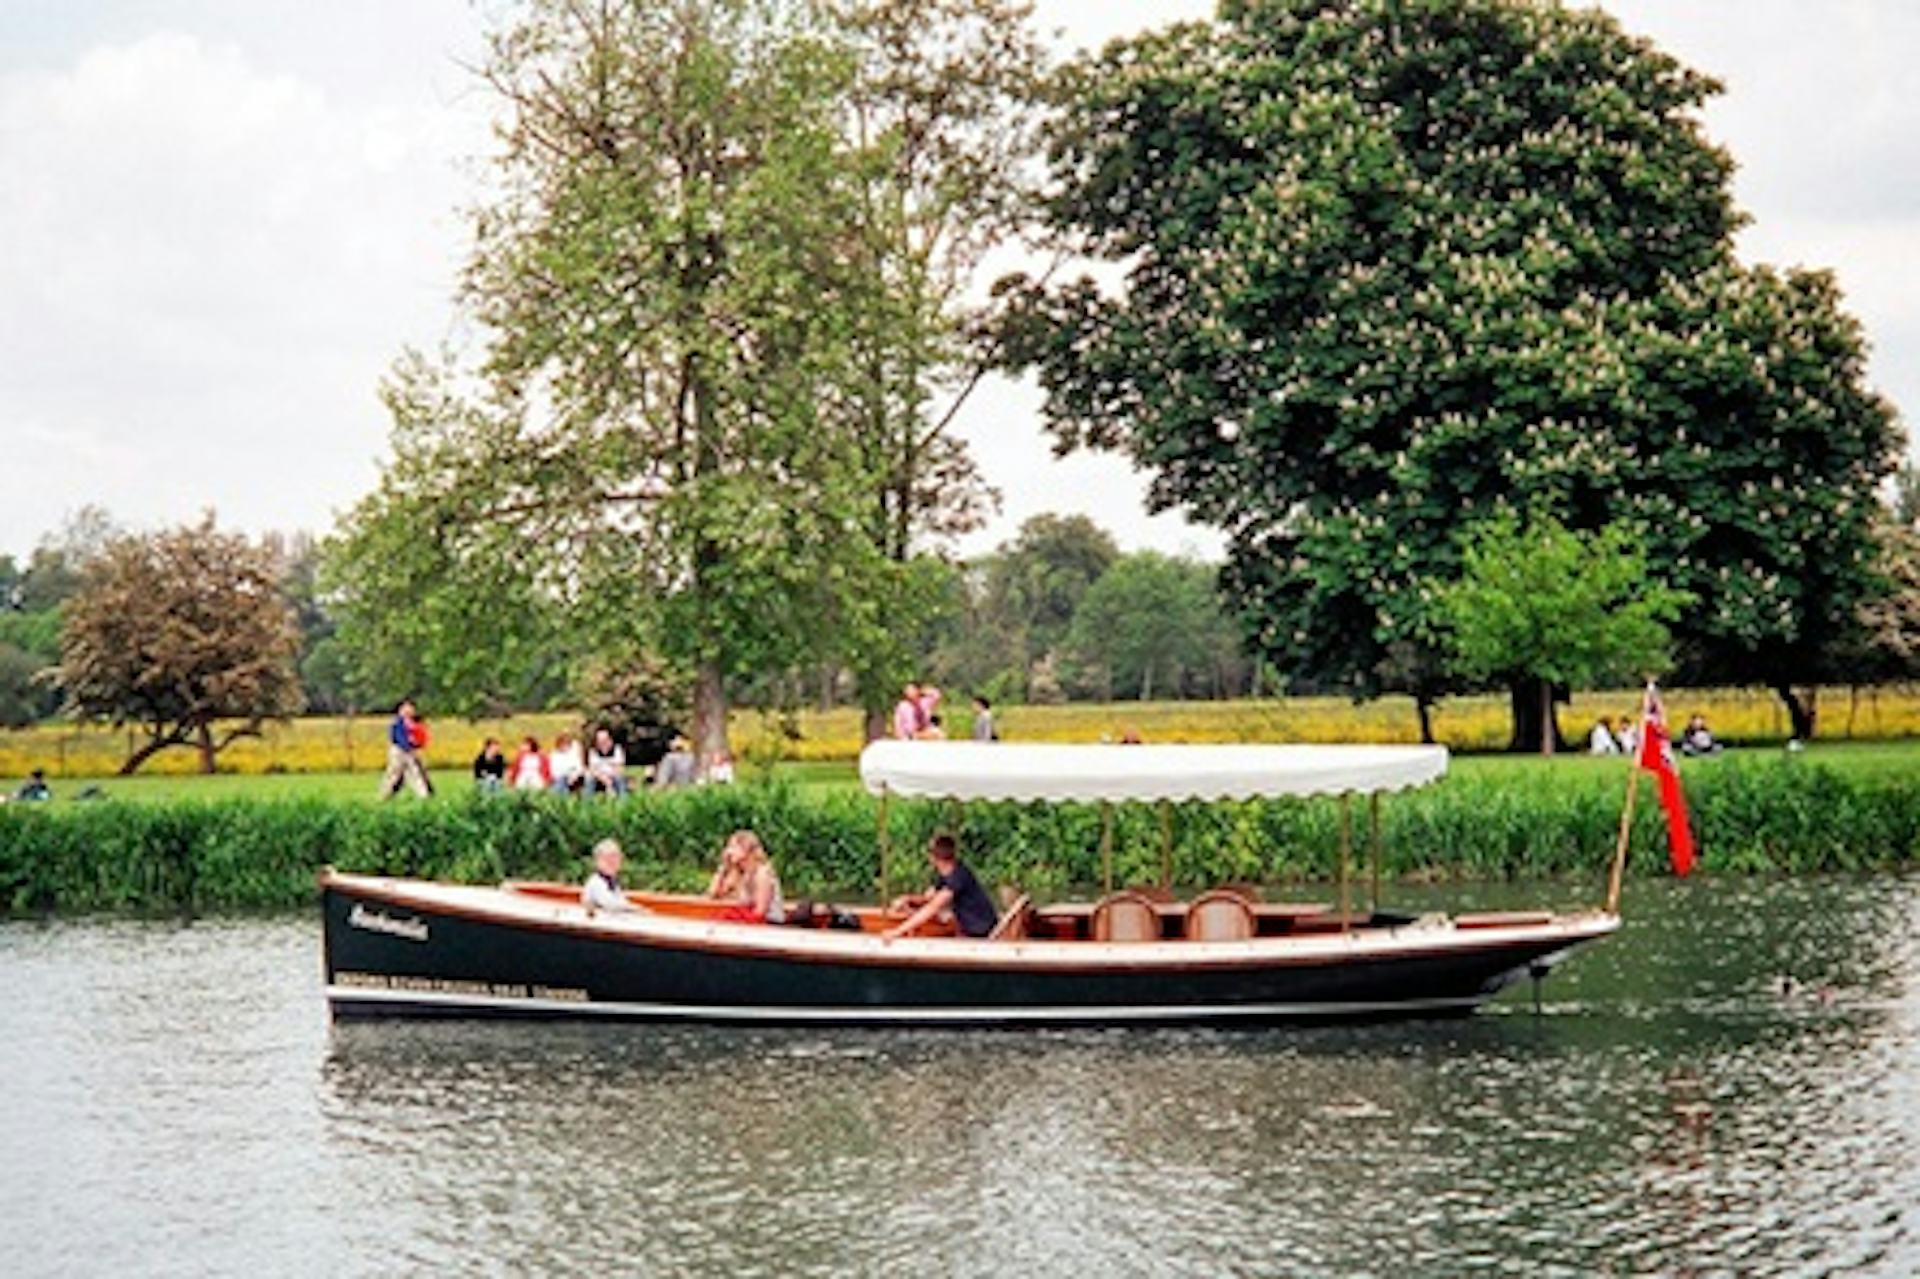 Oxford River Cruise and Three Course Meal with Wine for Two at Brasserie Blanc